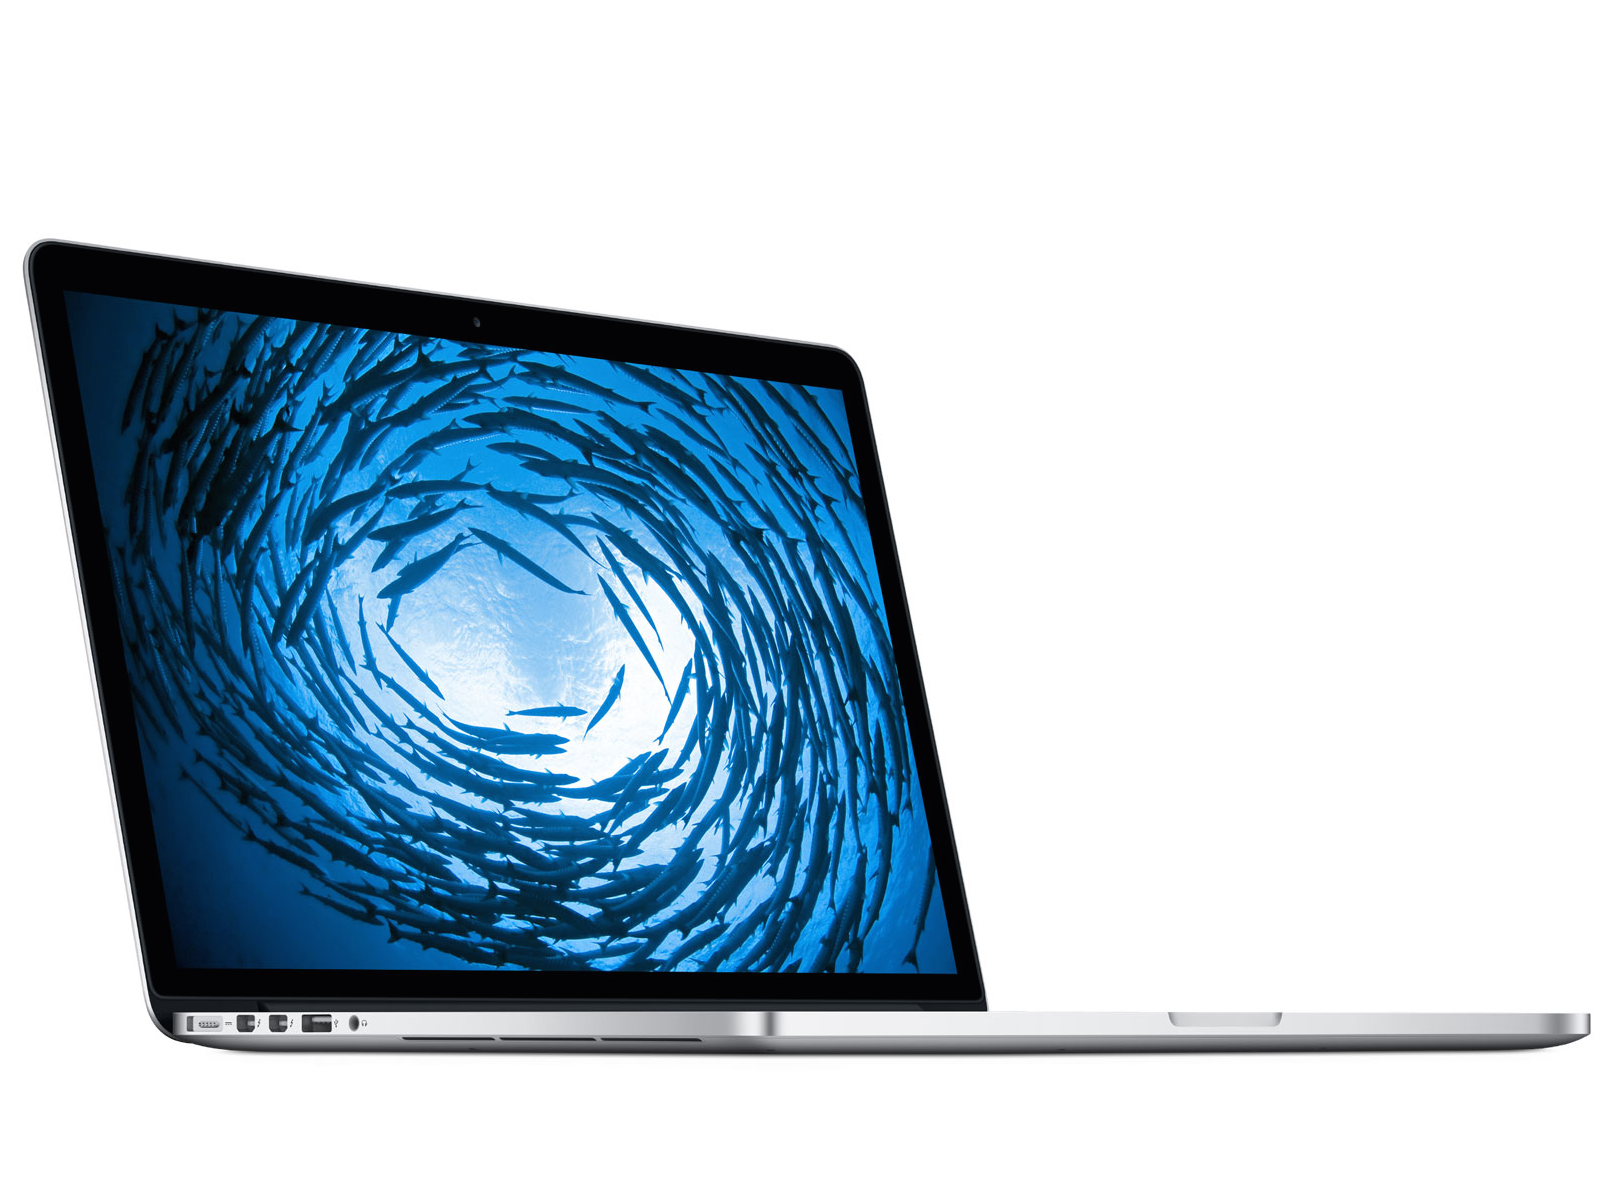 Apple MacBook Pro Retina 15 Late 2013 Notebook Review